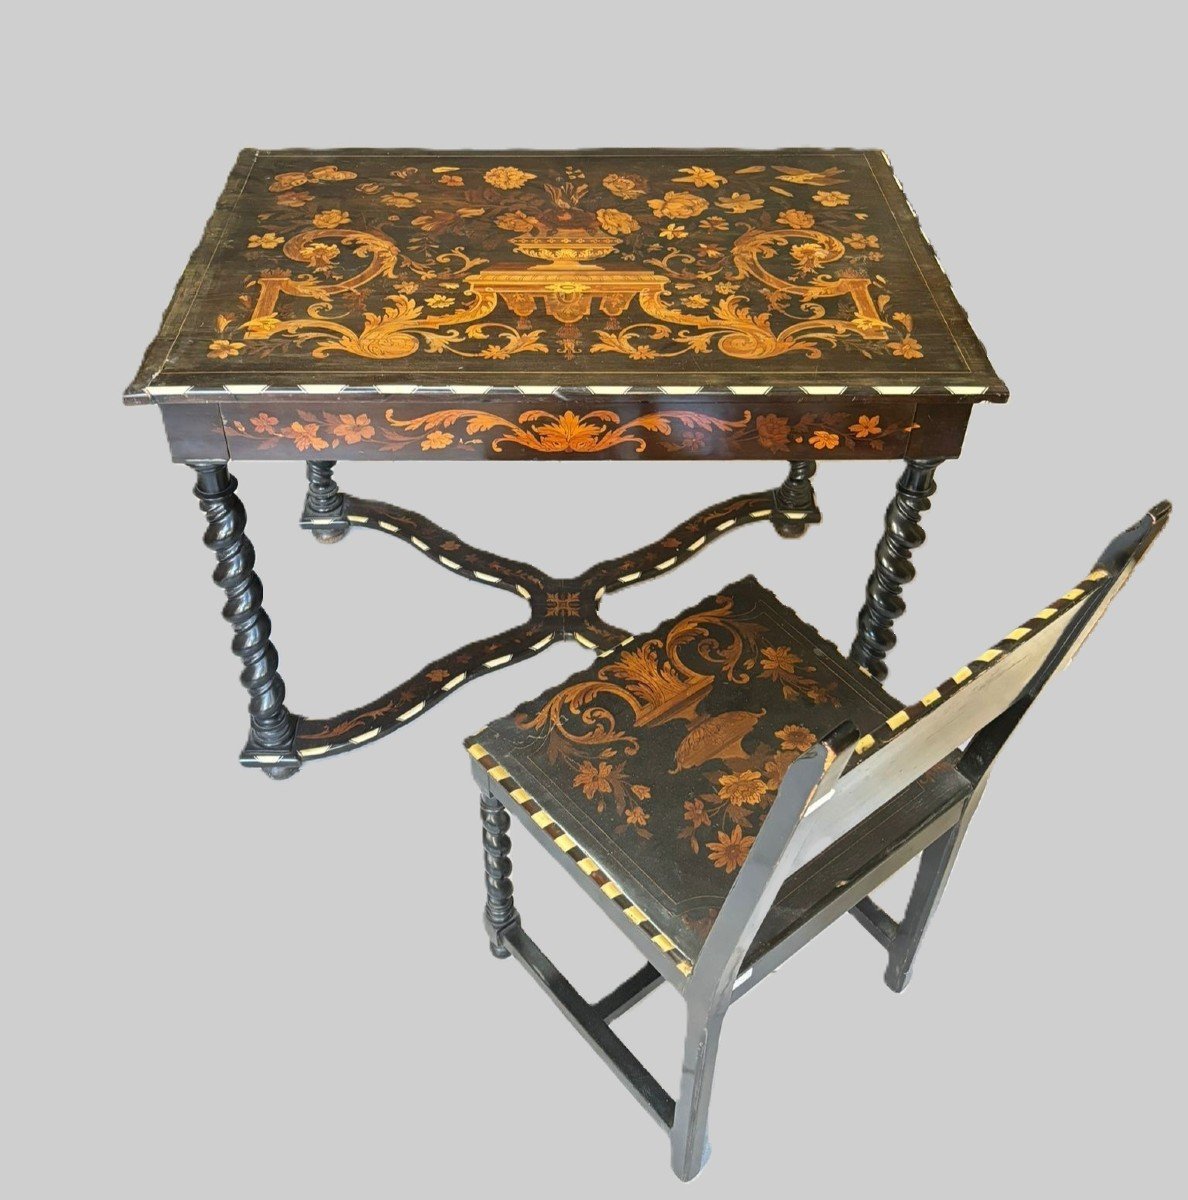 Center Desk Table With Chair, Louis XIV France Style, Nineteenth Century Inlays In Various Woods, Ivories.